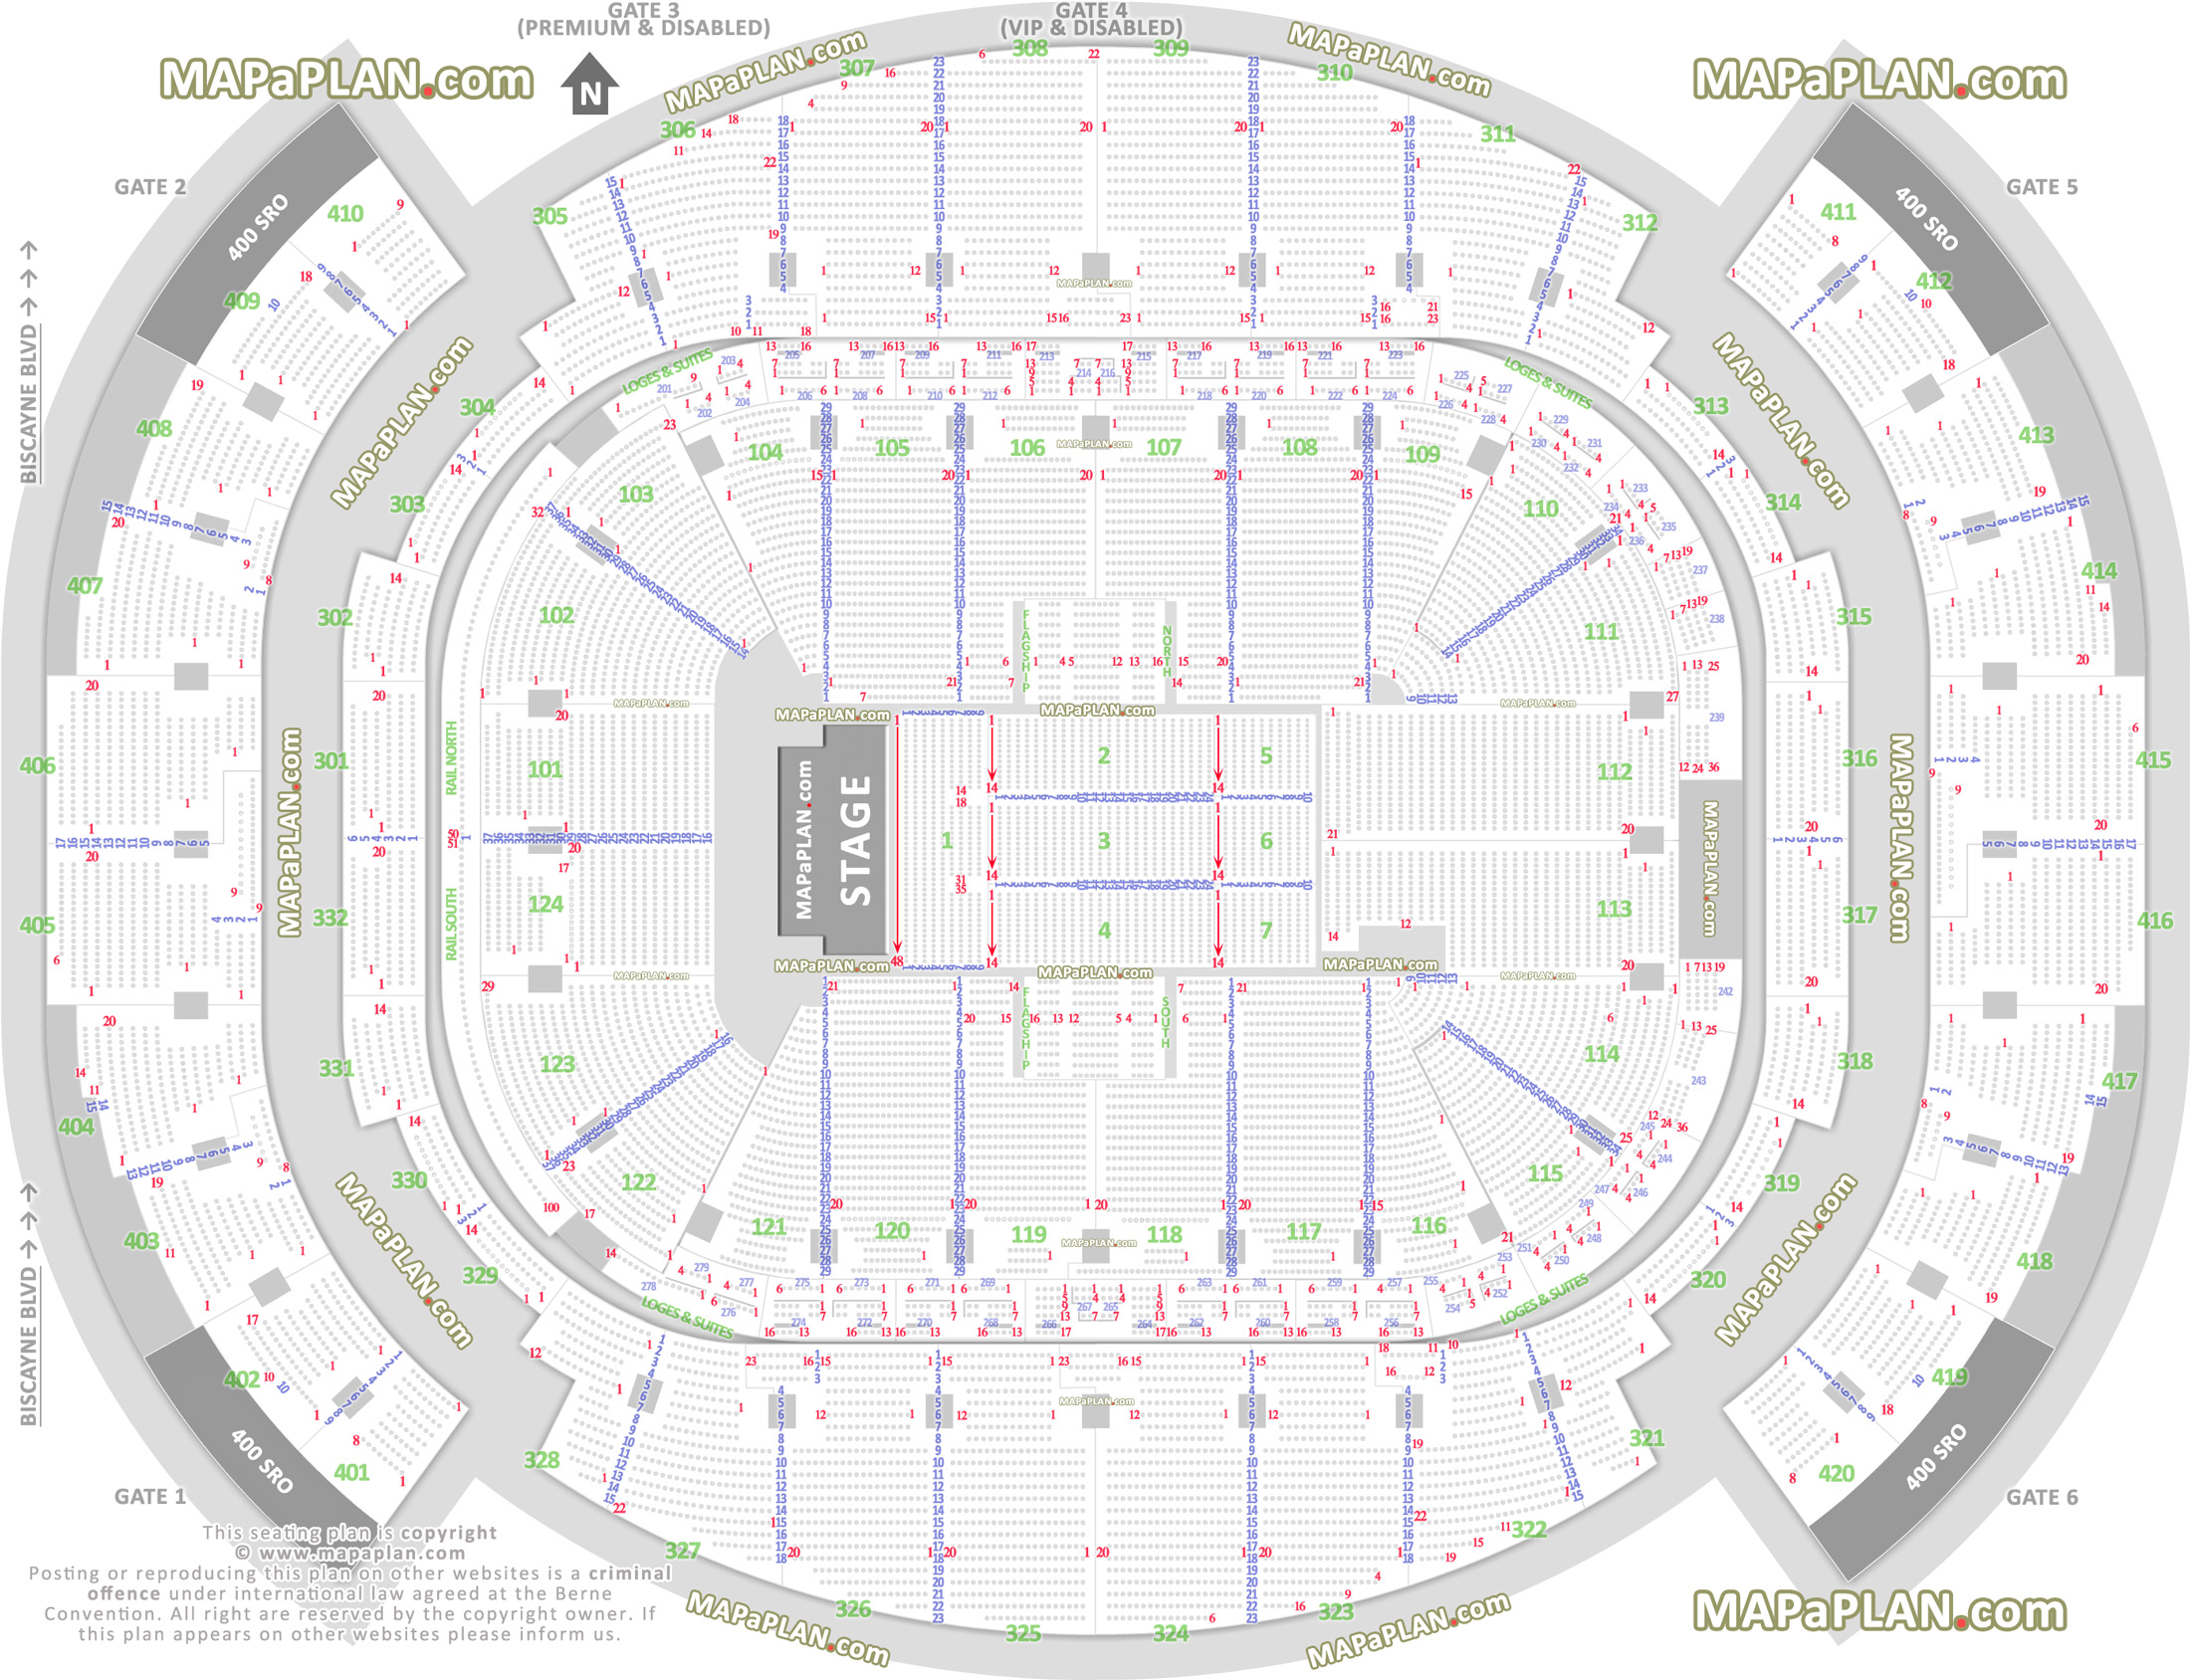 Miami Airlines Arena Seating Chart